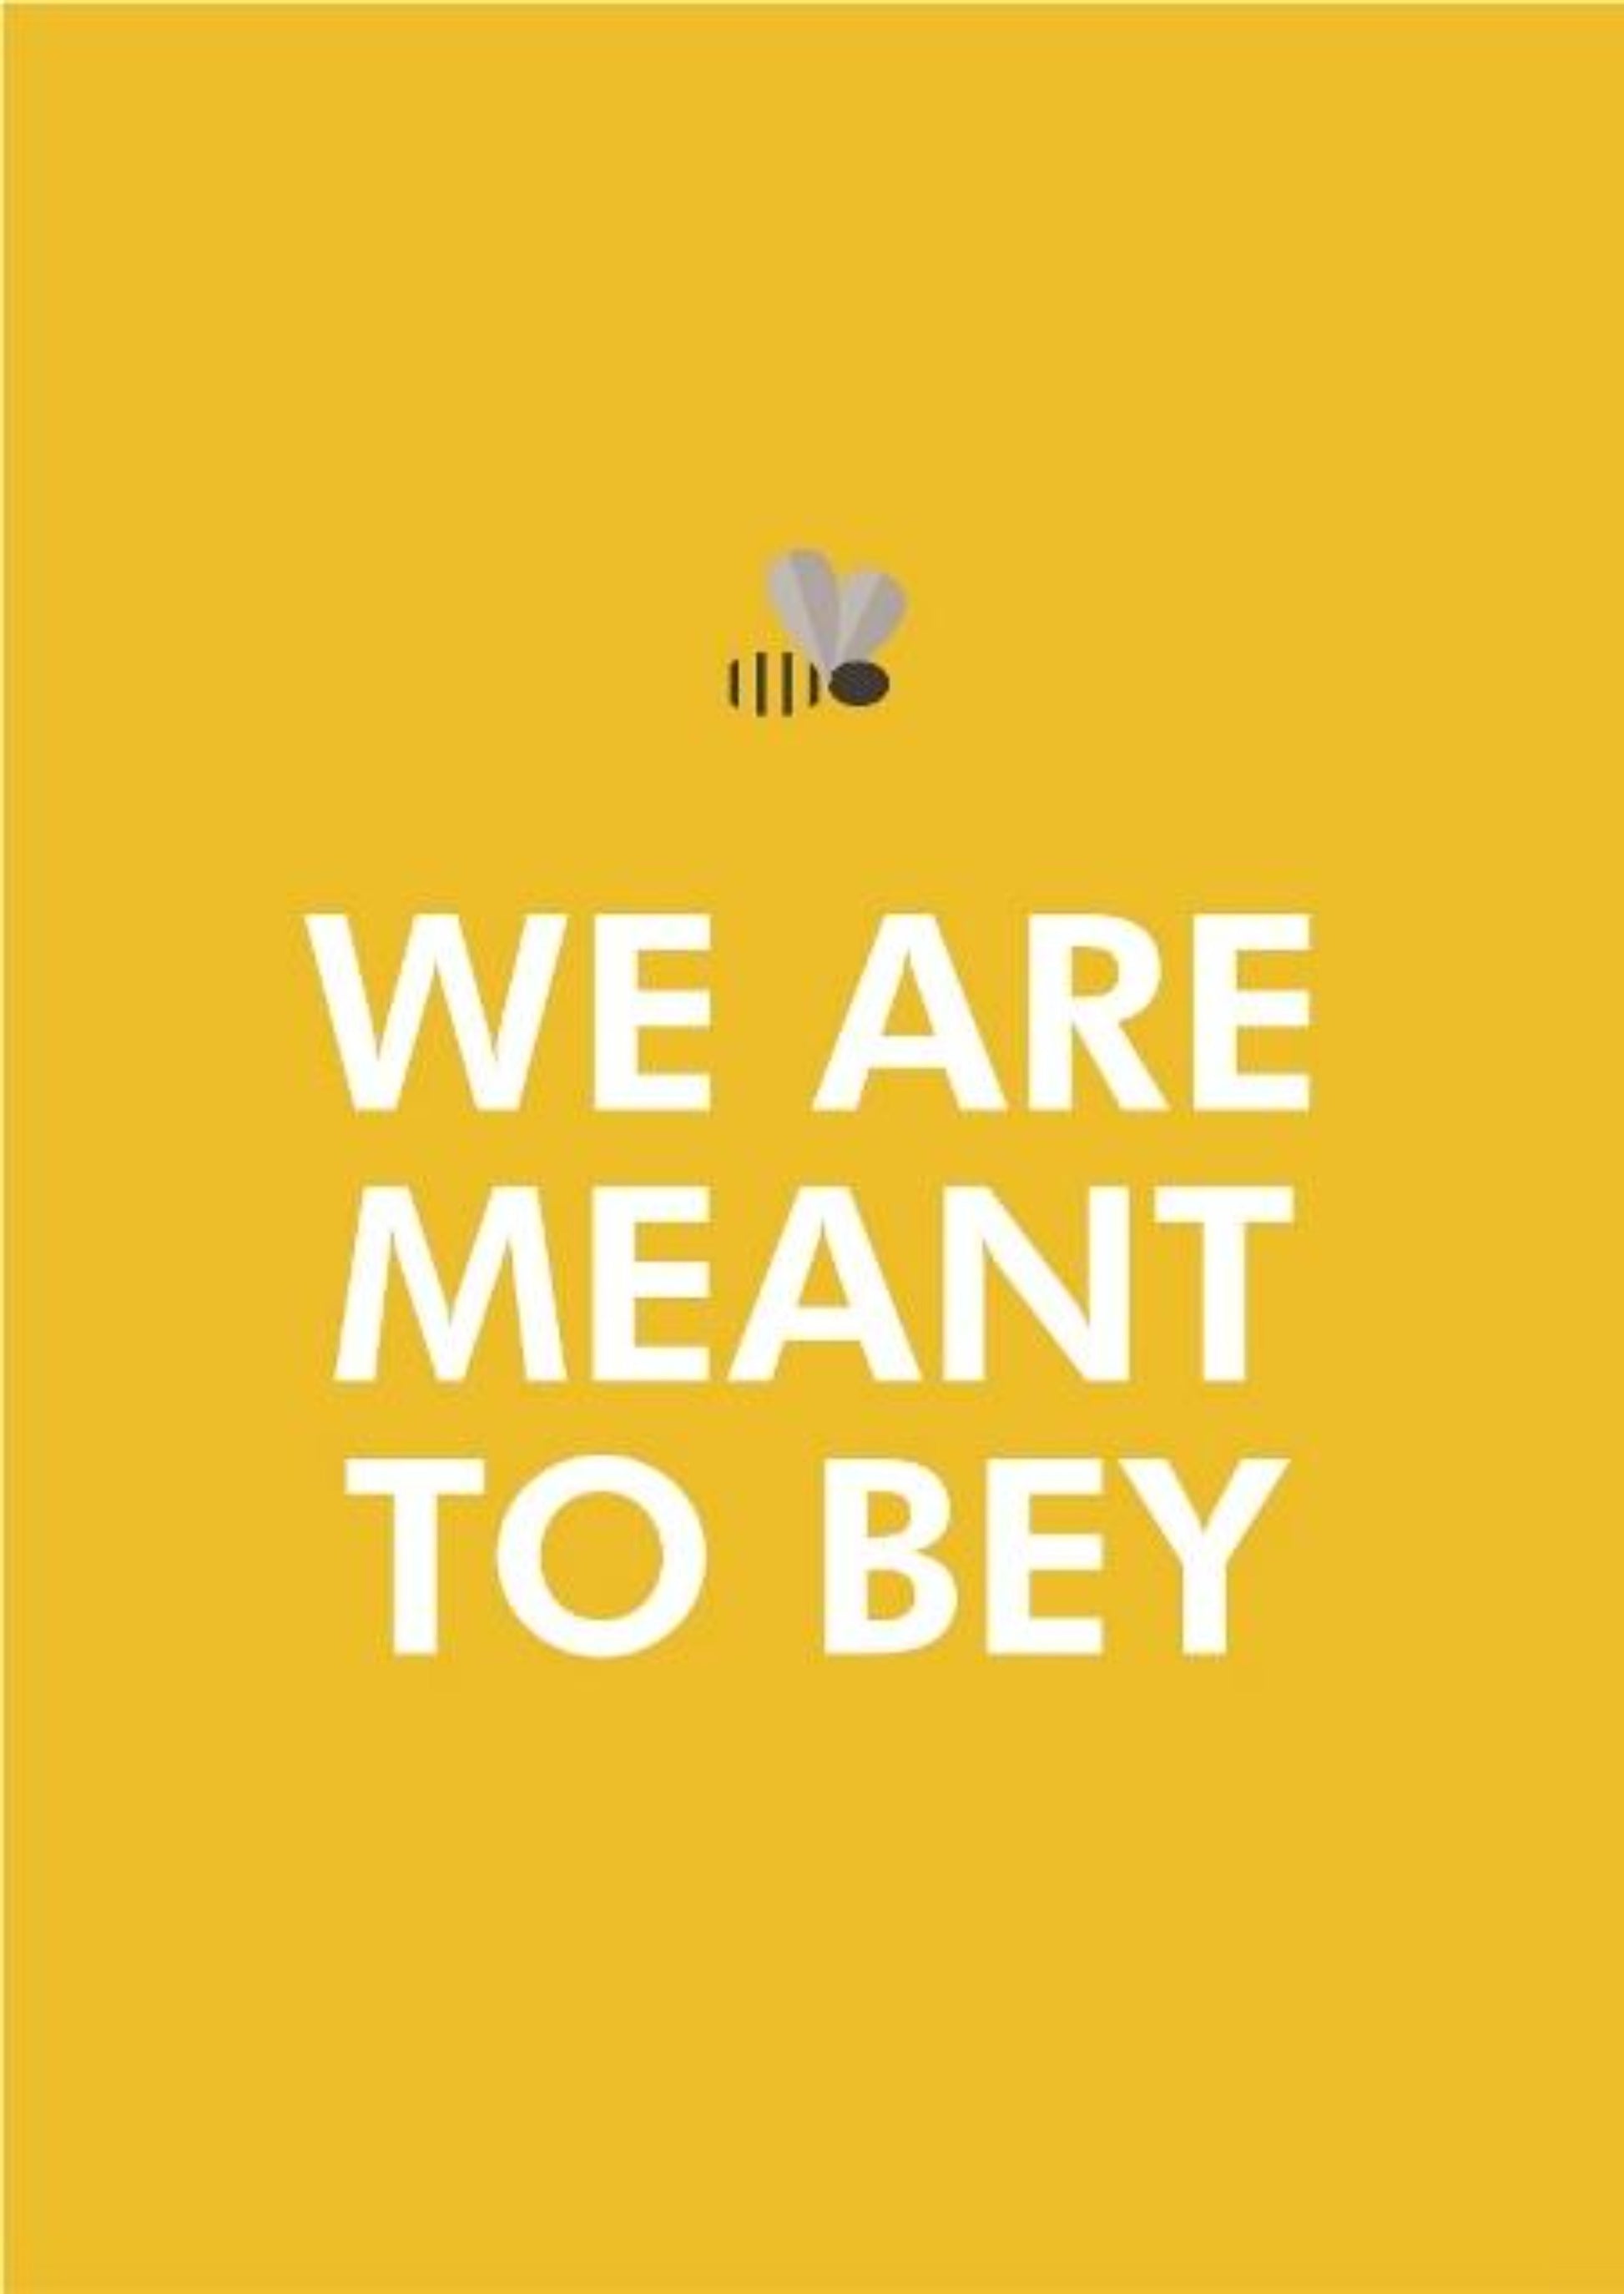 We Are Meant To Bey.